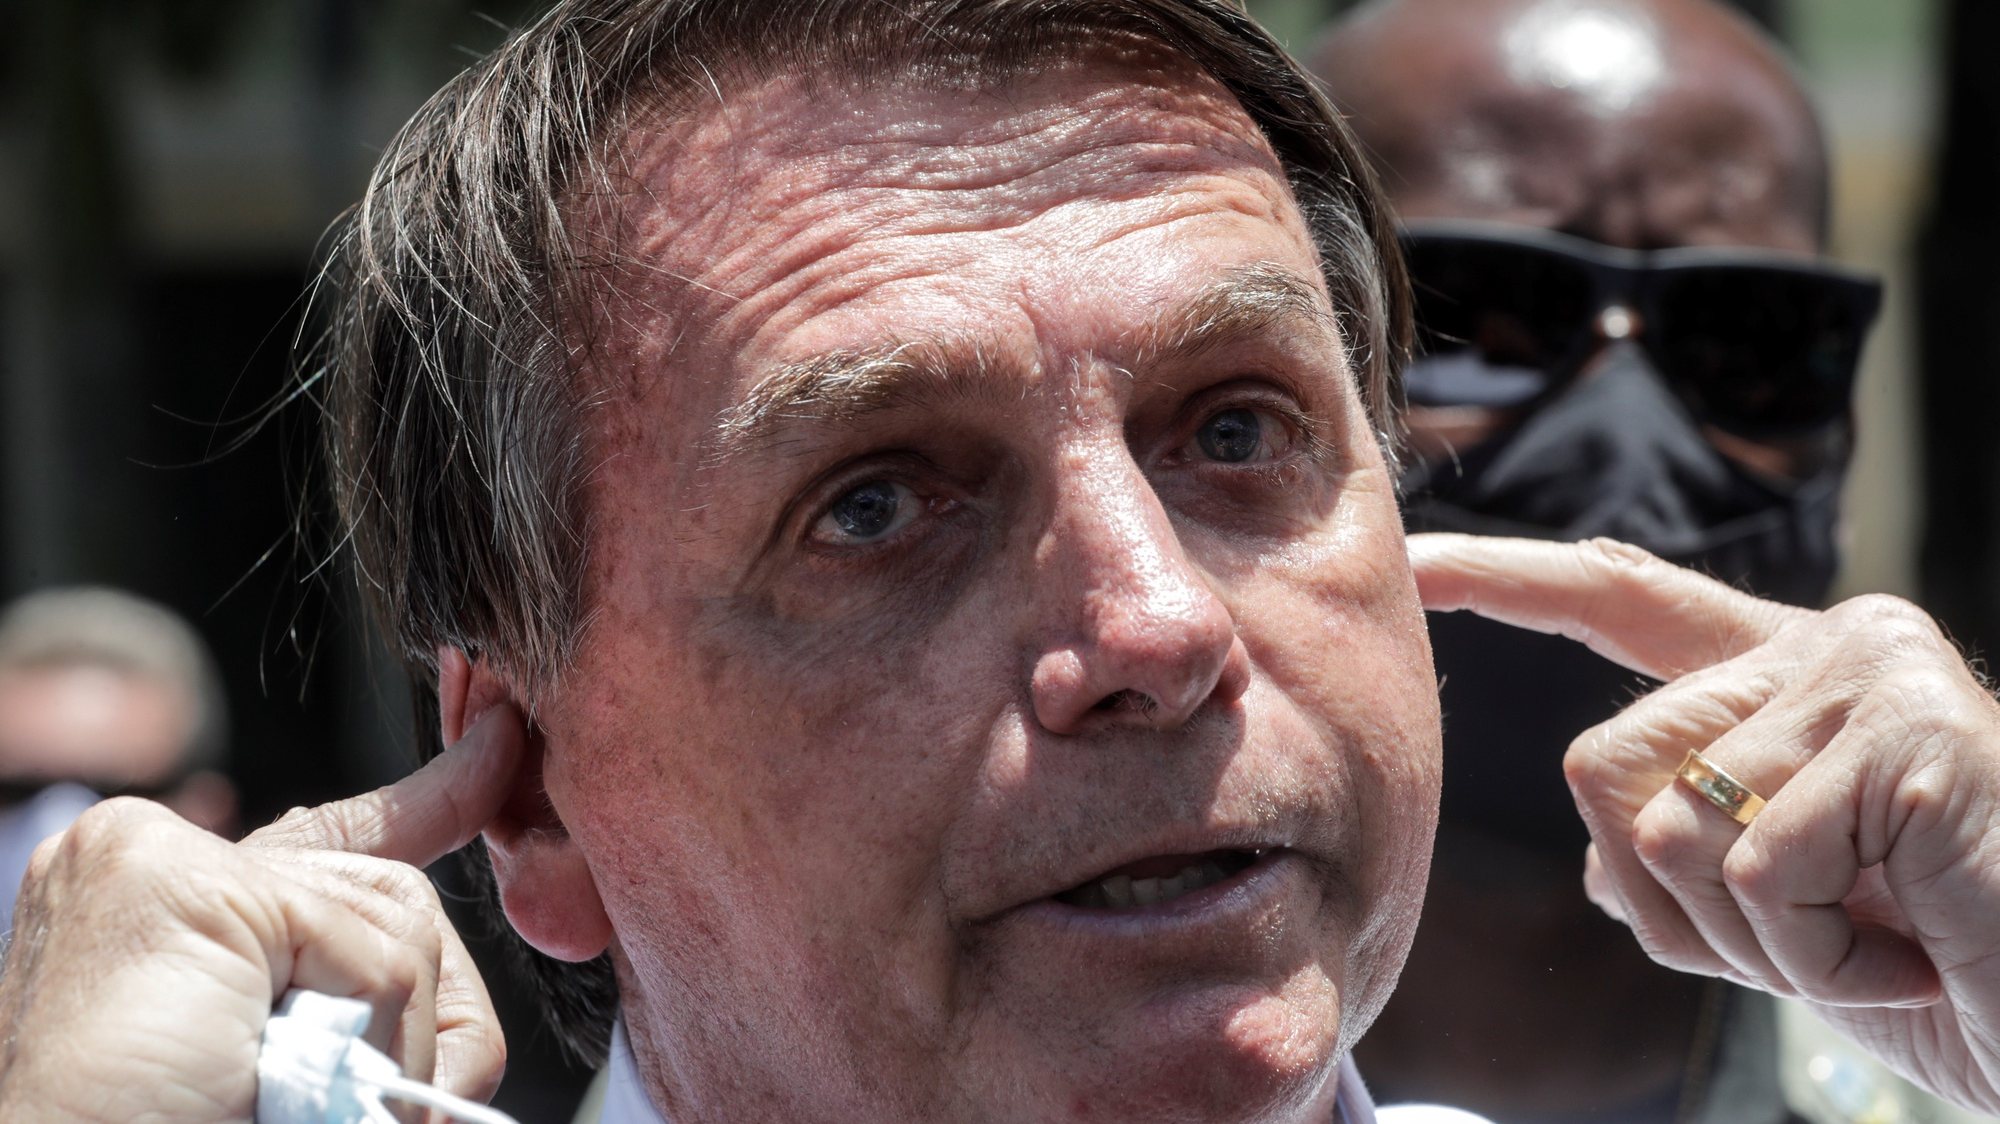 epa08851517 Brazilian President Jair Bolsonaro makes a statement after voting during the second round of Municipal elections at a polling station in Rio de Janeiro, Brazil, 29 November 2020. Brazil is holding the second round of municipal elections in the country on 29 November.  EPA/ANTONIO LACERDA